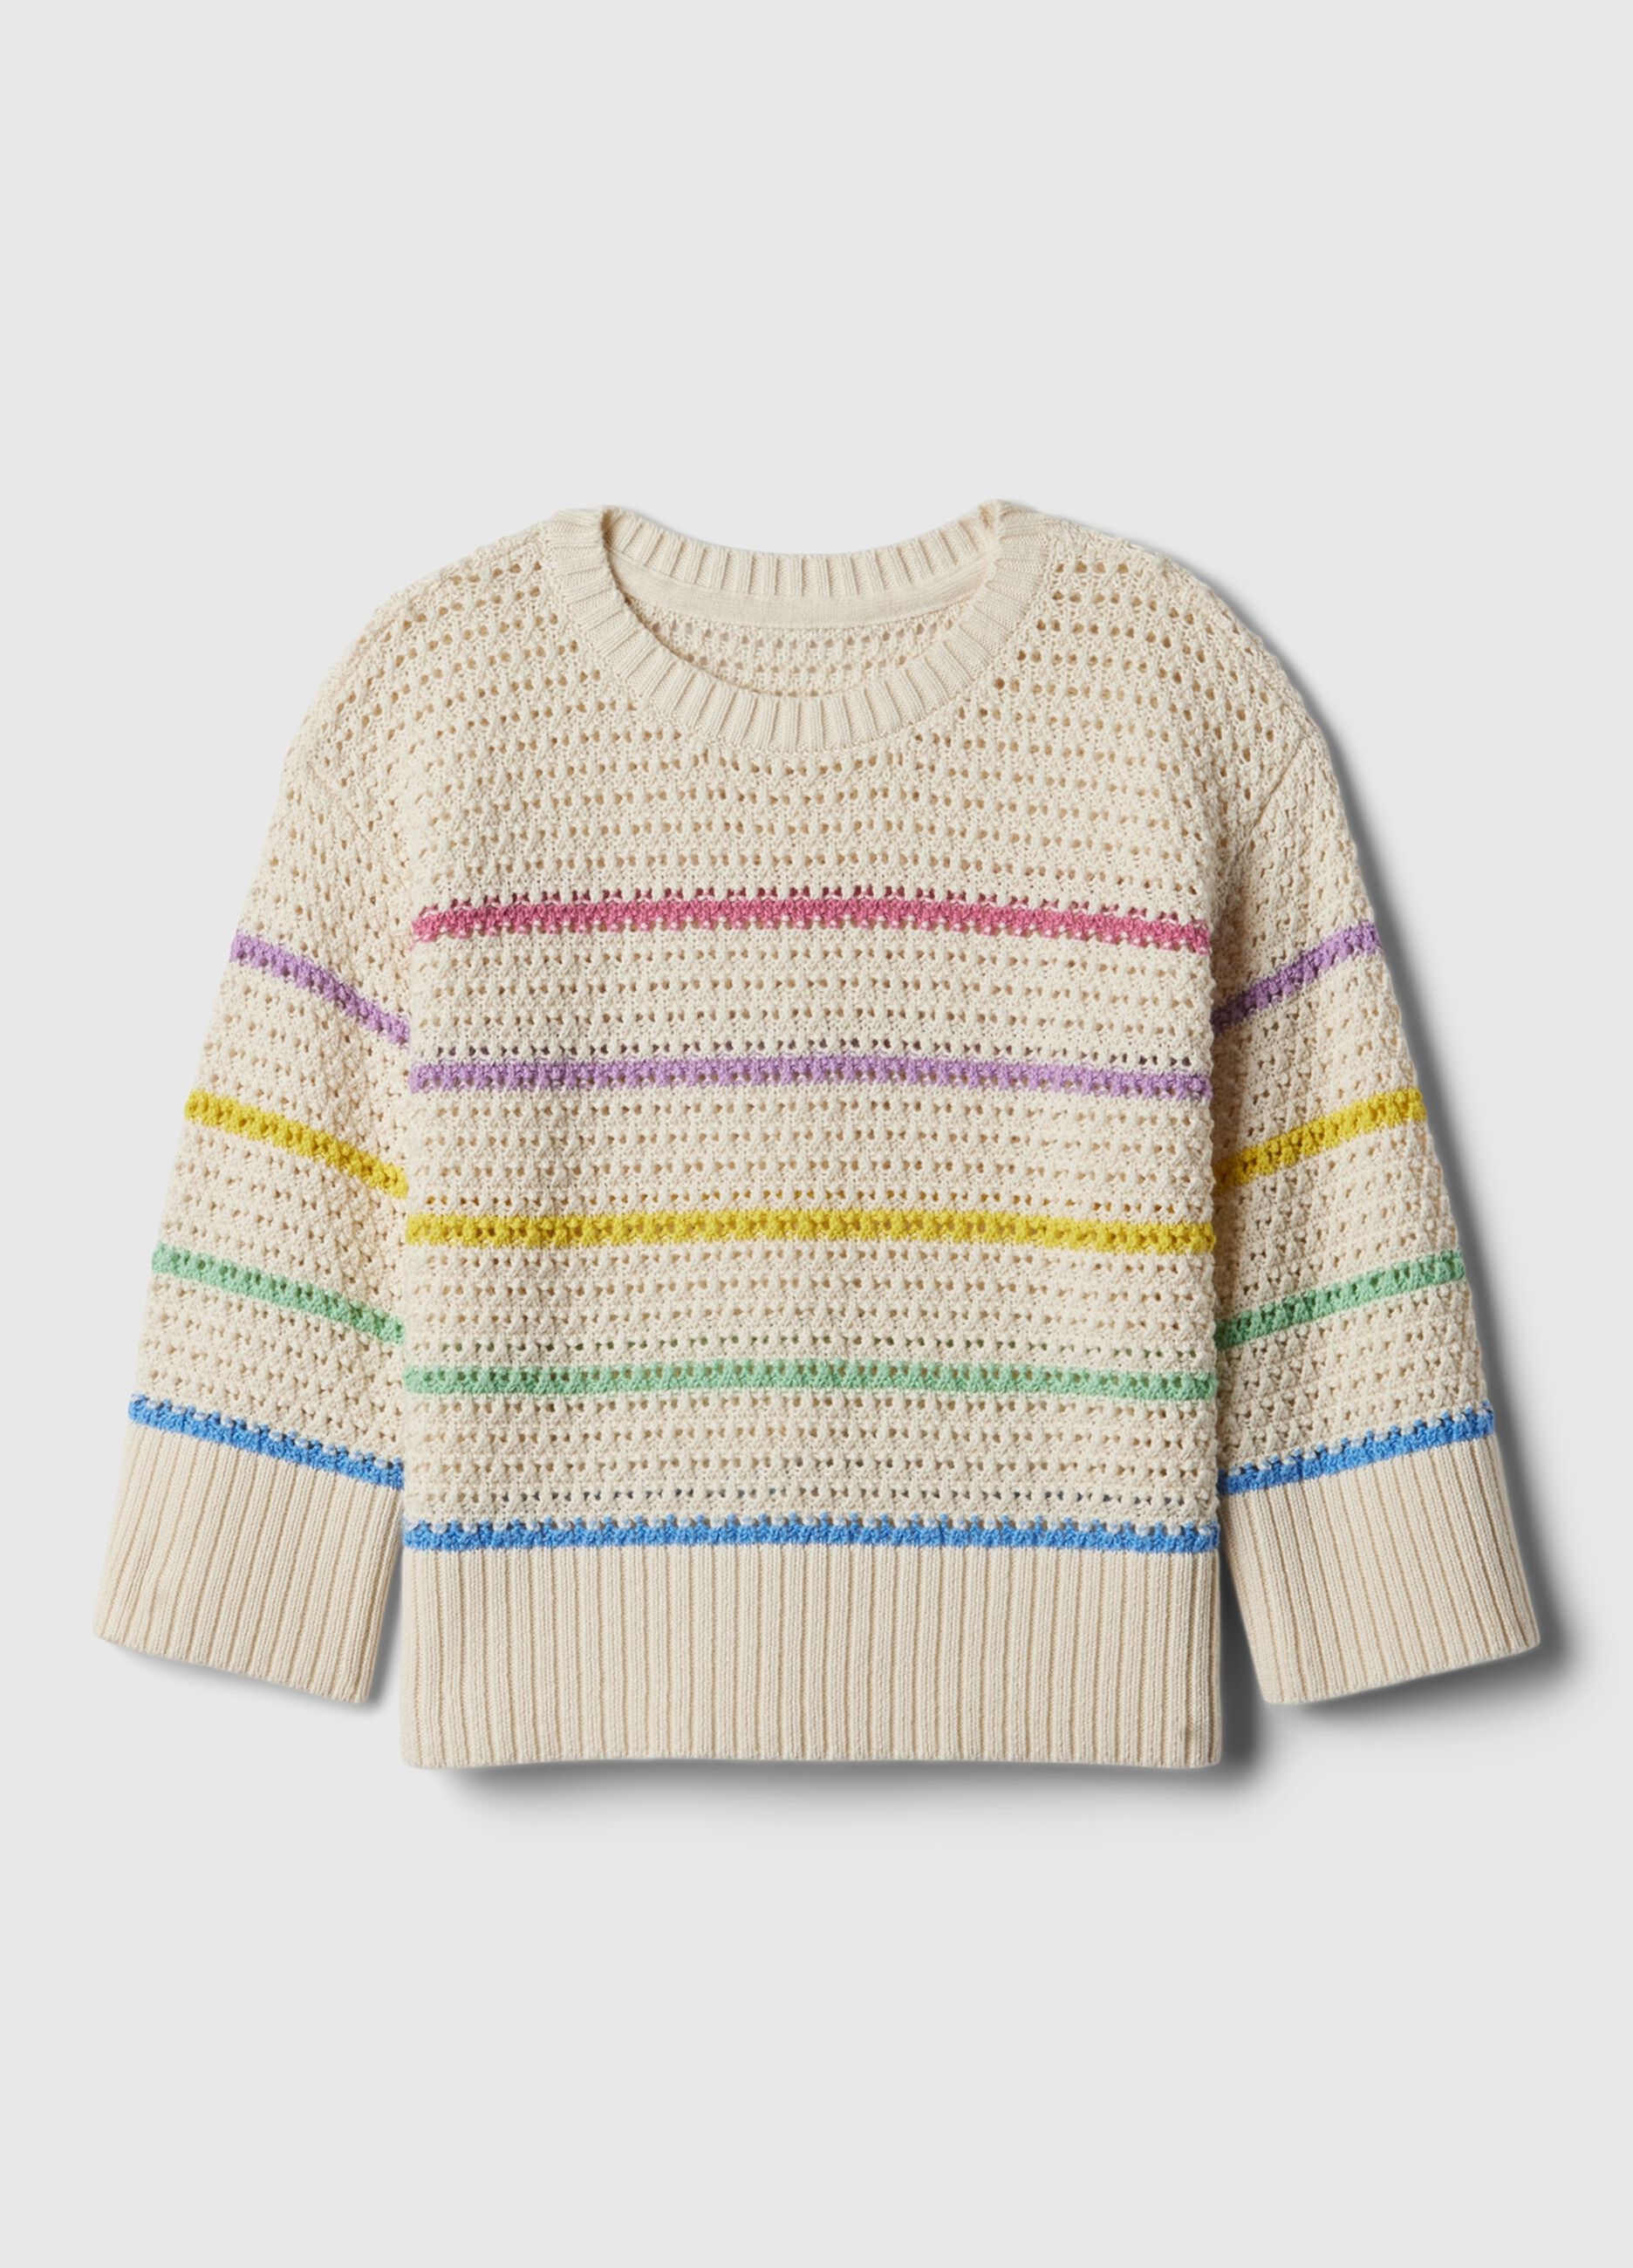 Striped pullover with openwork design